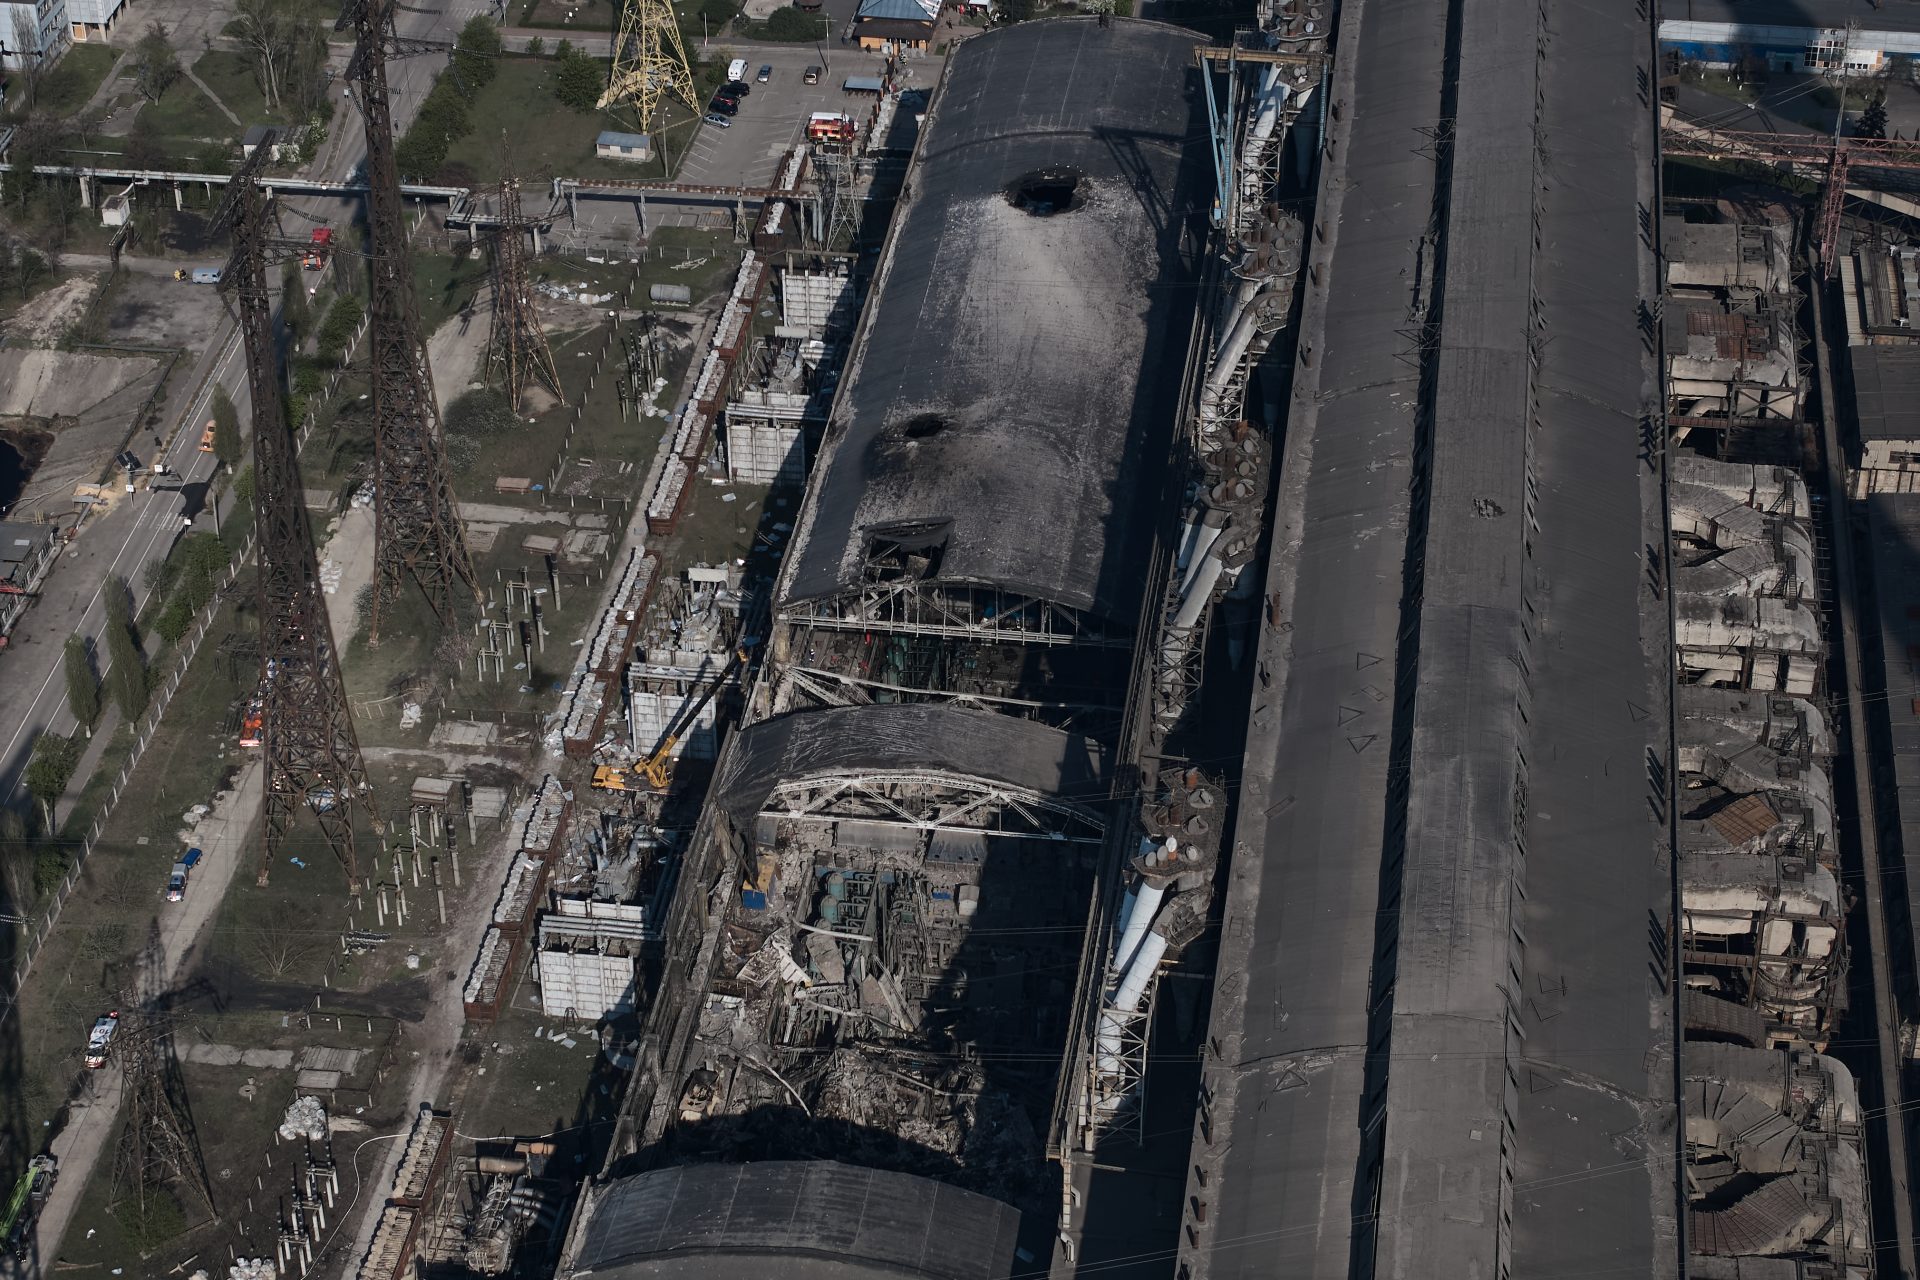 <p><span>The attack on the Trypilska Thermal Power Plant also included 82 missiles and drones in total according to CNN and the Ukrainian Air Force claimed it shot down 18 missiles as well as 32 drones.  </span></p>